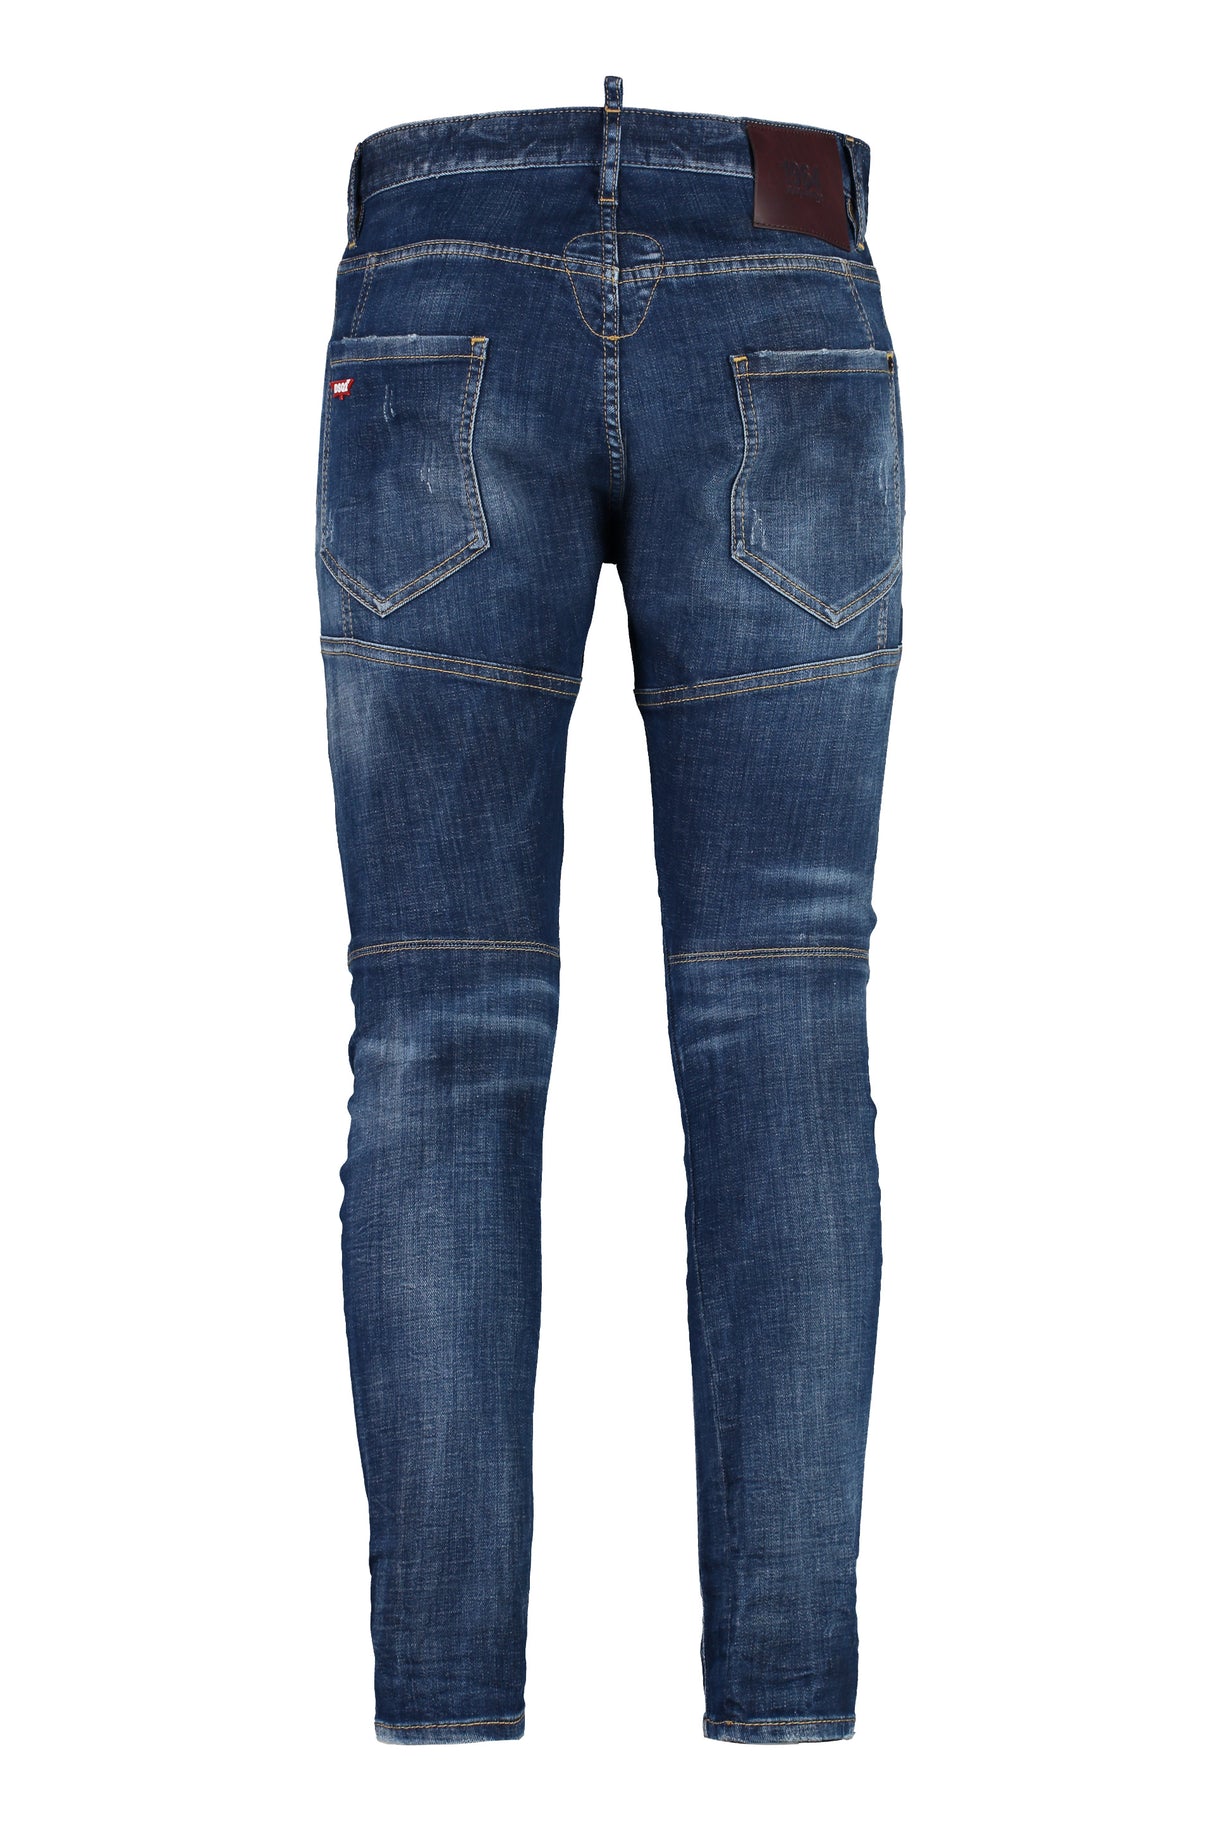 Distressed Blue Jeans with Leather Logo Patch for Men